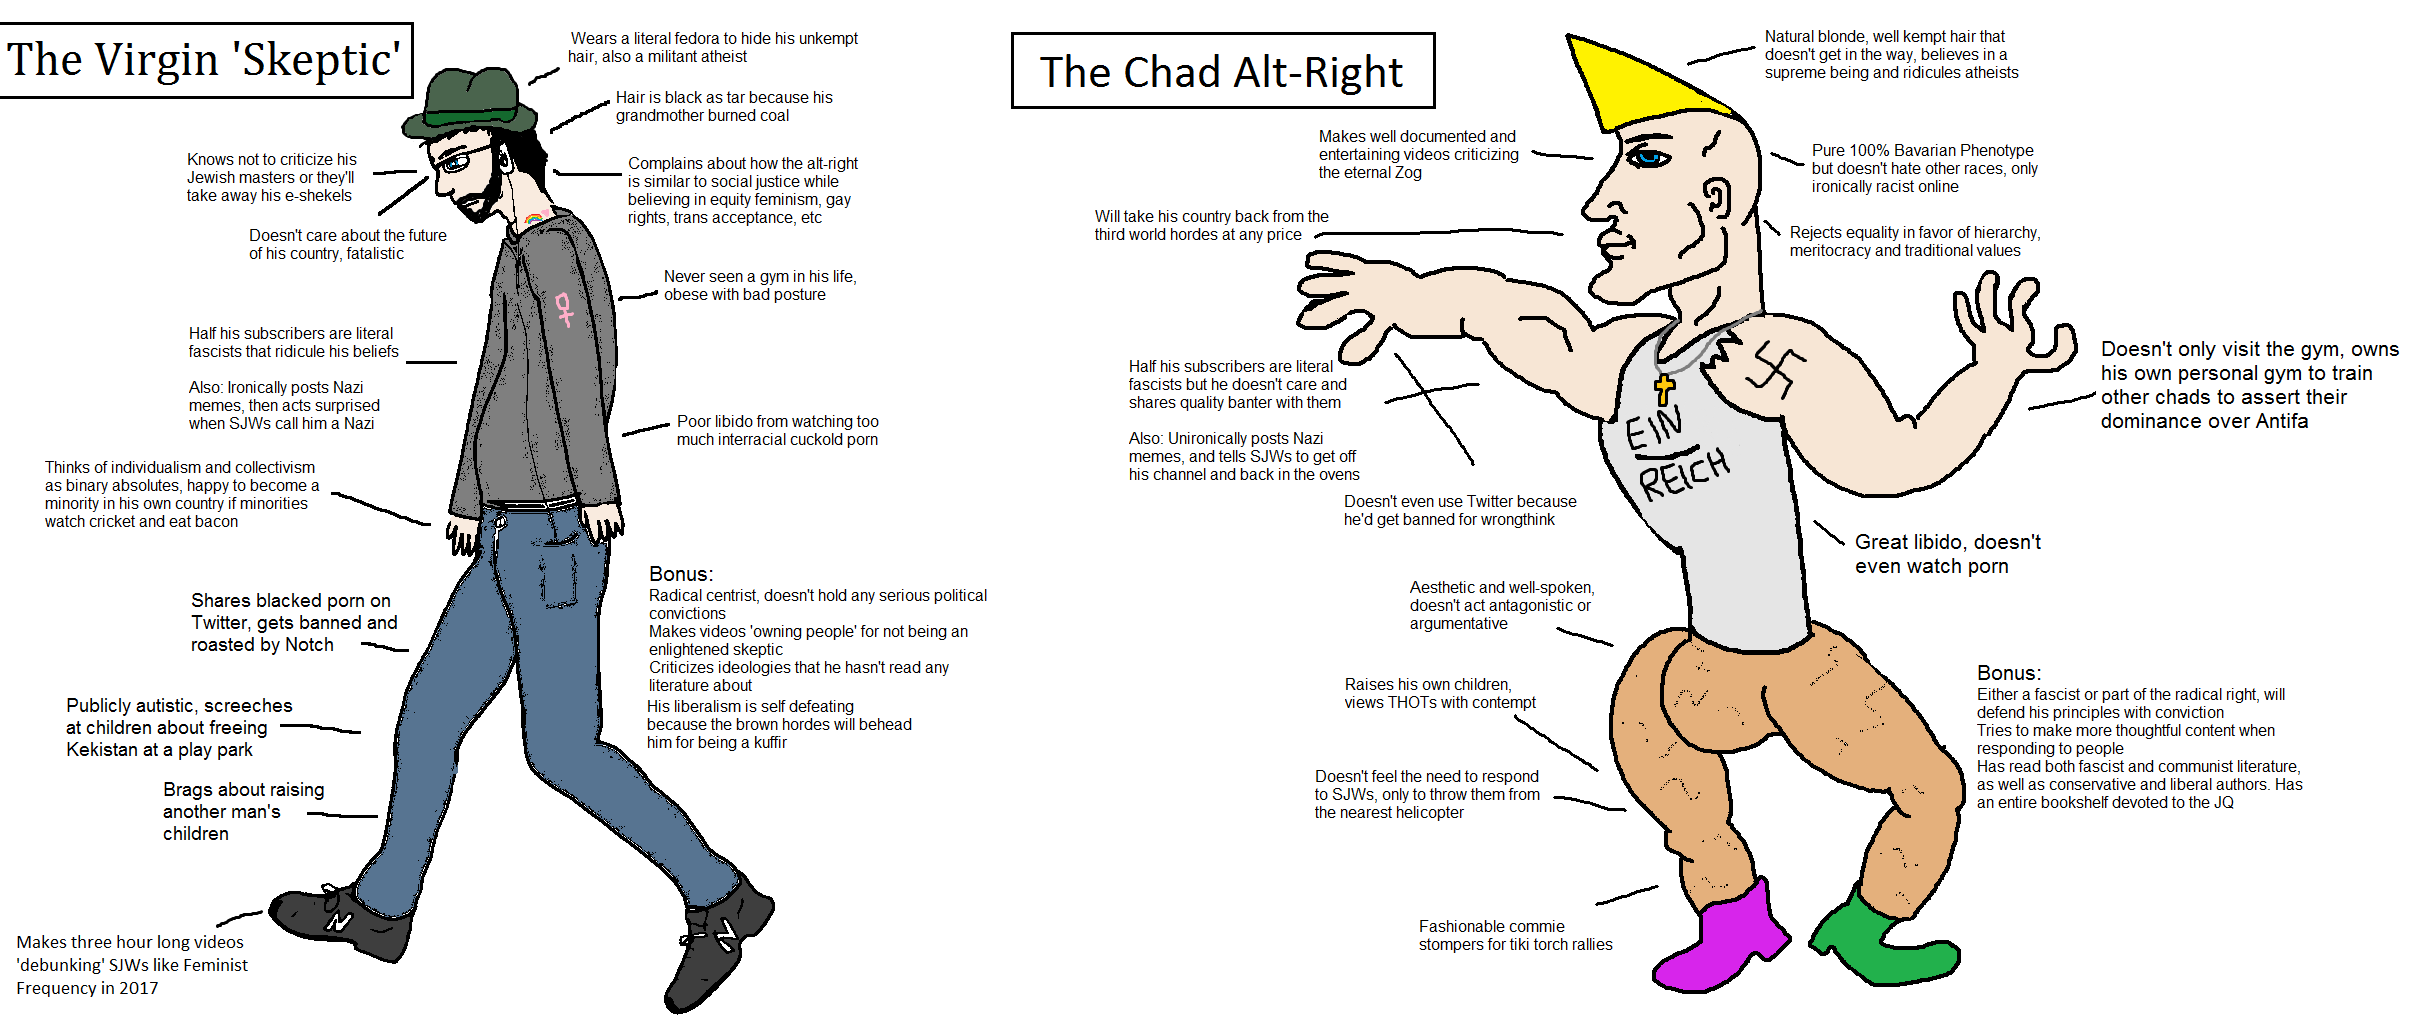 /sp/ - Have I guys seen these new chad memes? There prett - mlpol.net